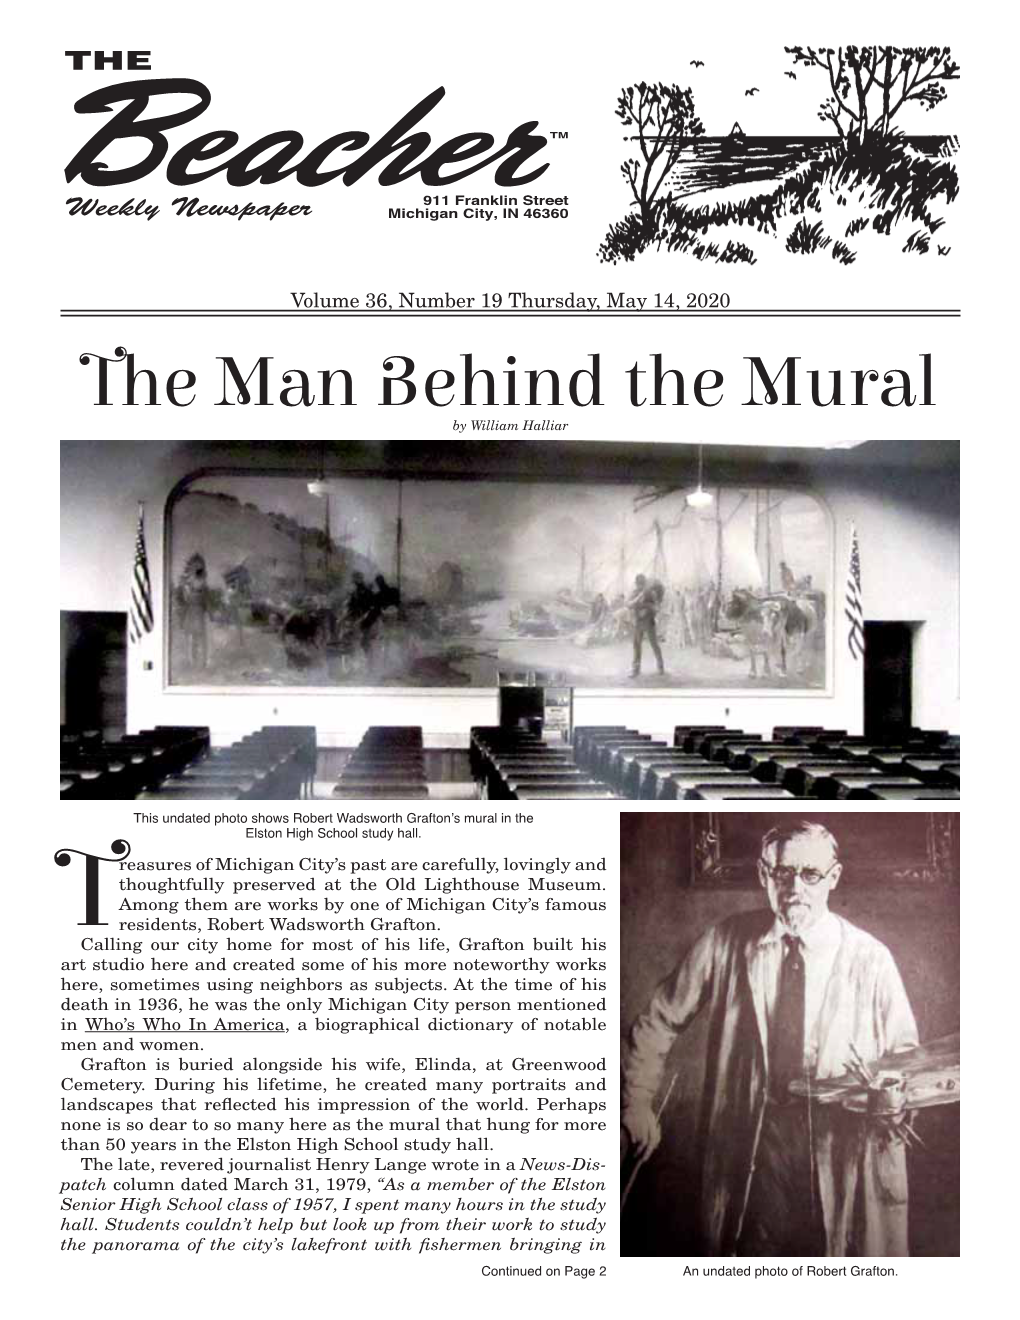 The Man Behind the Mural by William Halliar